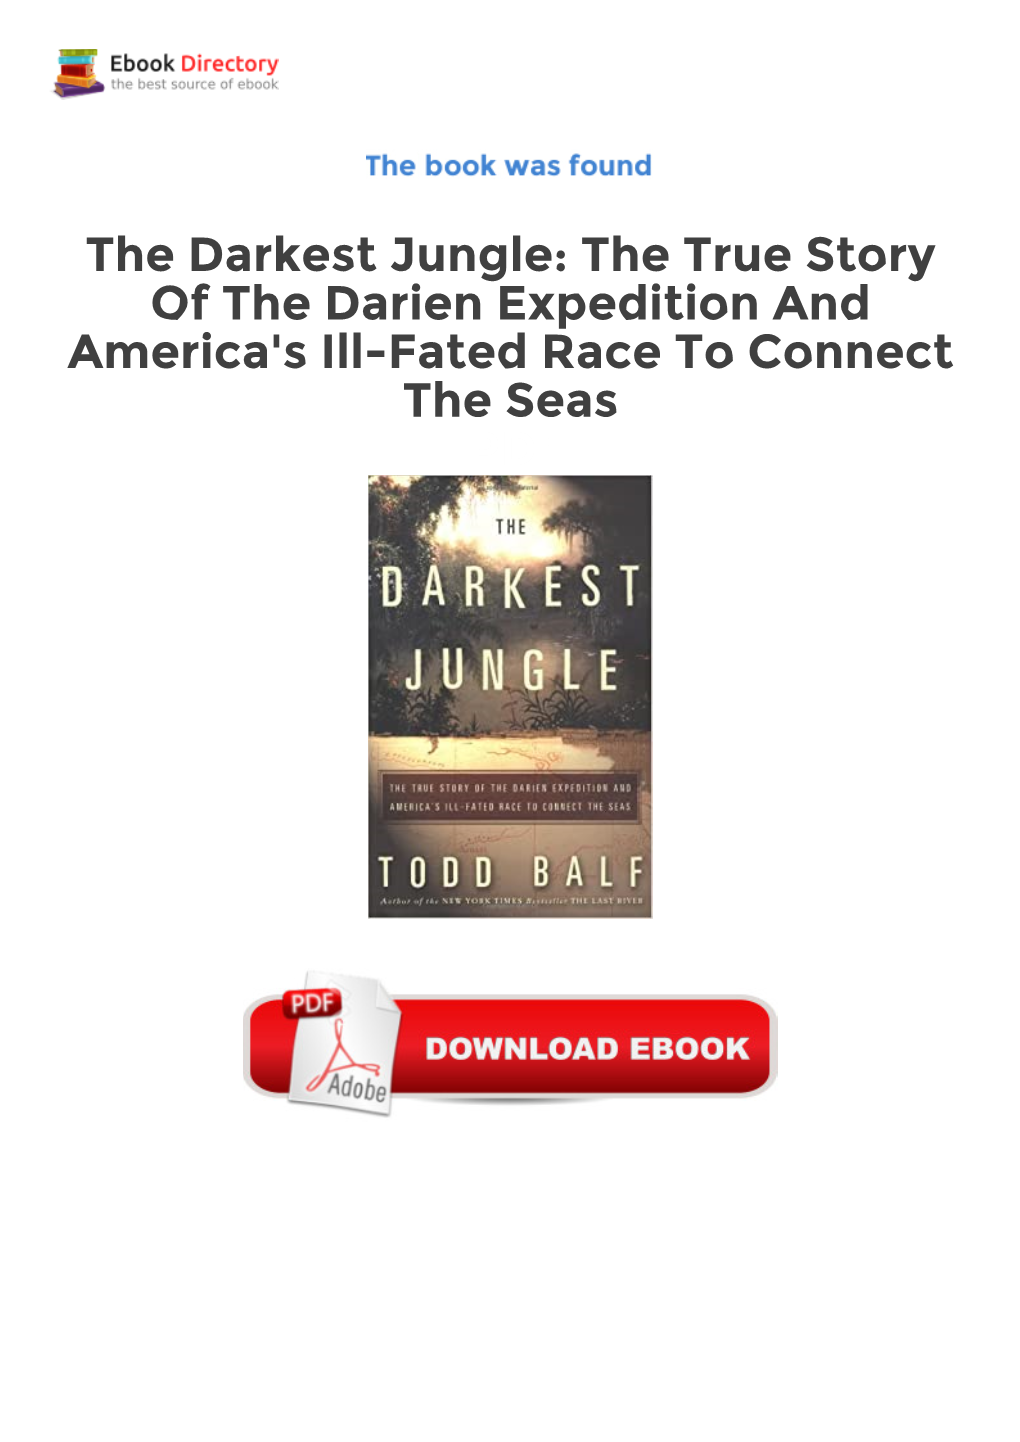 The Darkest Jungle: the True Story of the Darien Expedition And